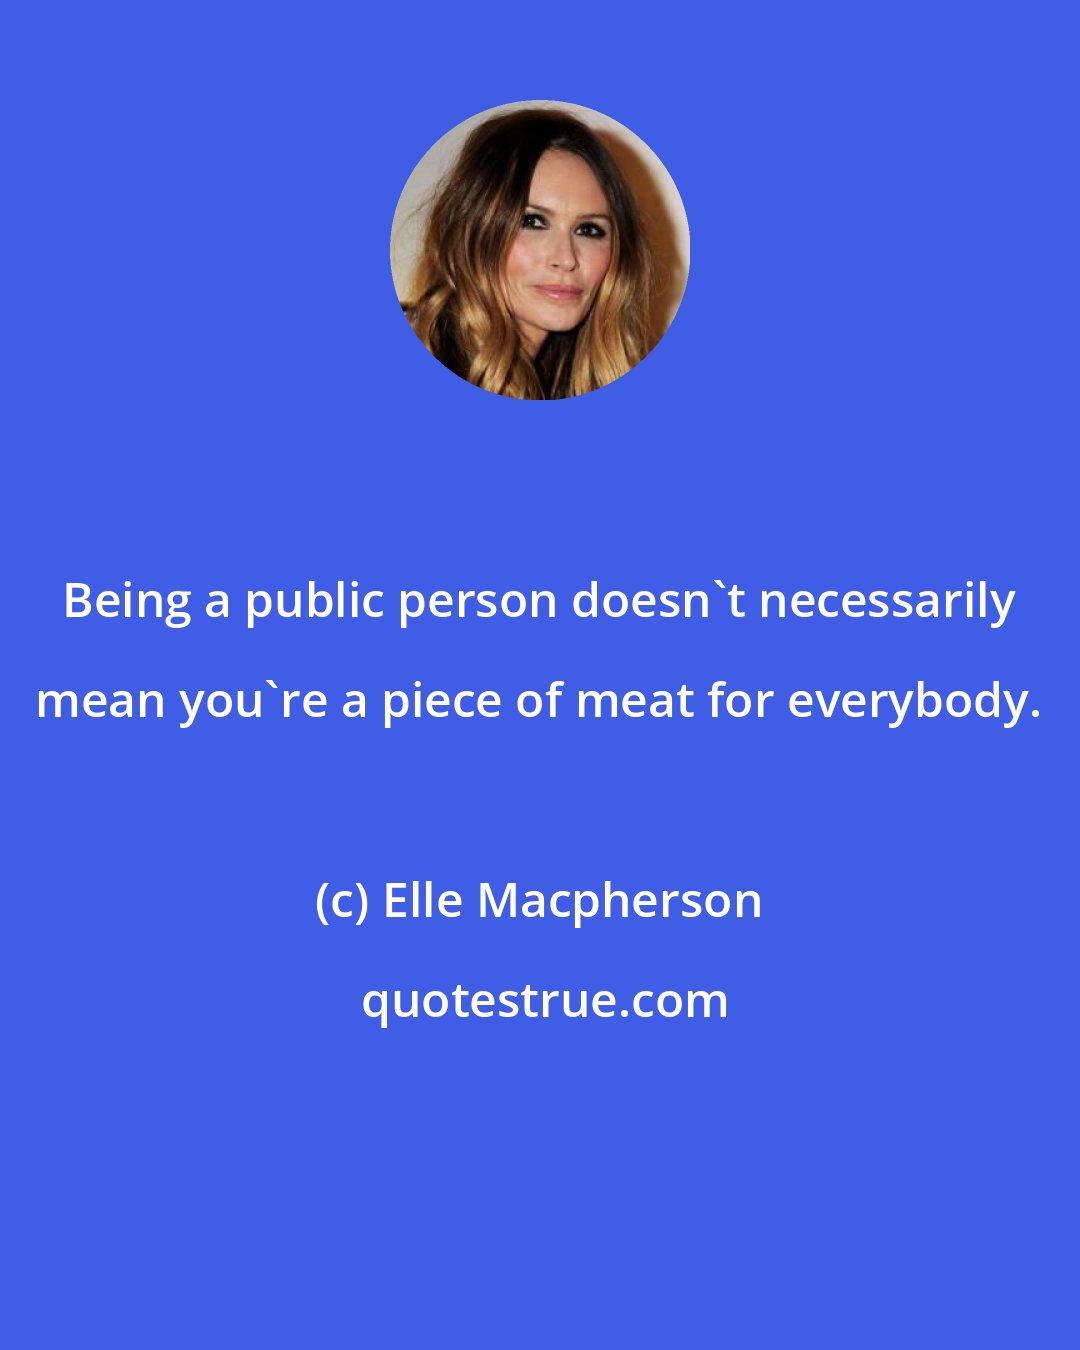 Elle Macpherson: Being a public person doesn't necessarily mean you're a piece of meat for everybody.